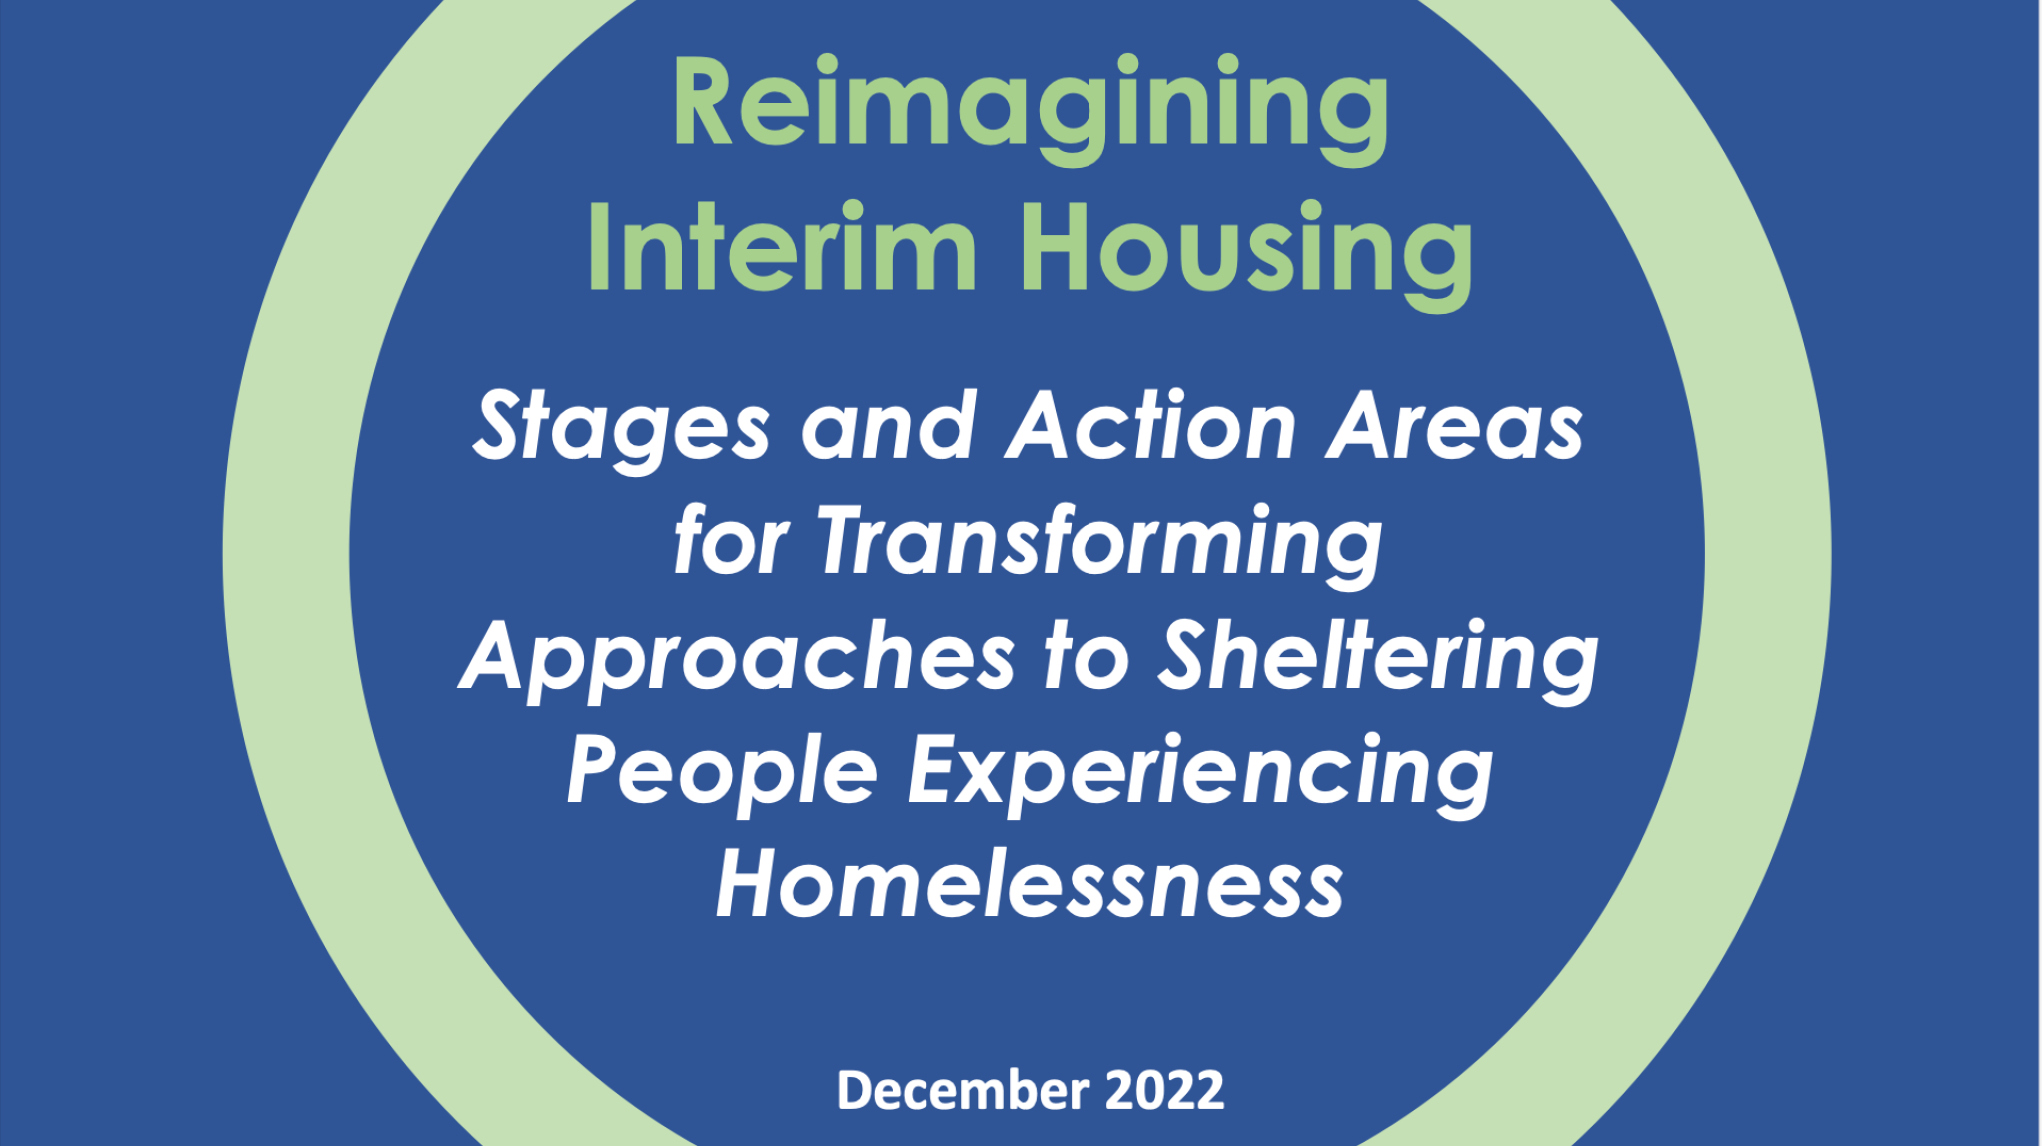 Reimagining Interim Housing: Stages and Action Areas for Transforming Approaches to Sheltering People Experiencing Homelessness